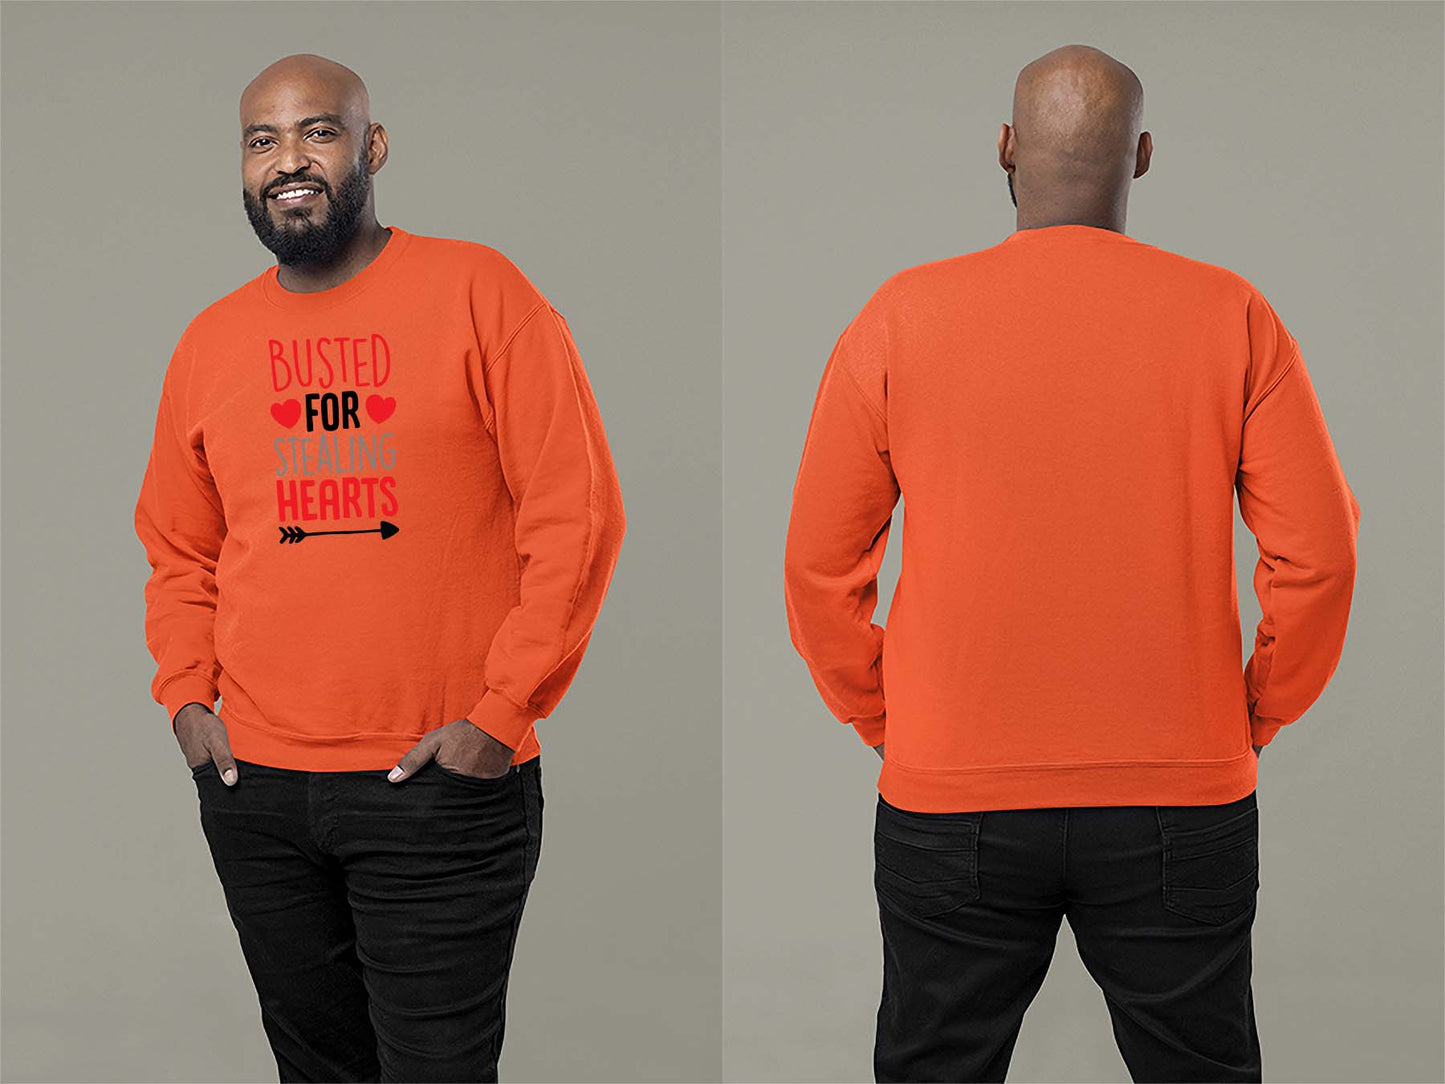 Fat Dave Busted For Stealing Hearts Sweatshirt Small Orange